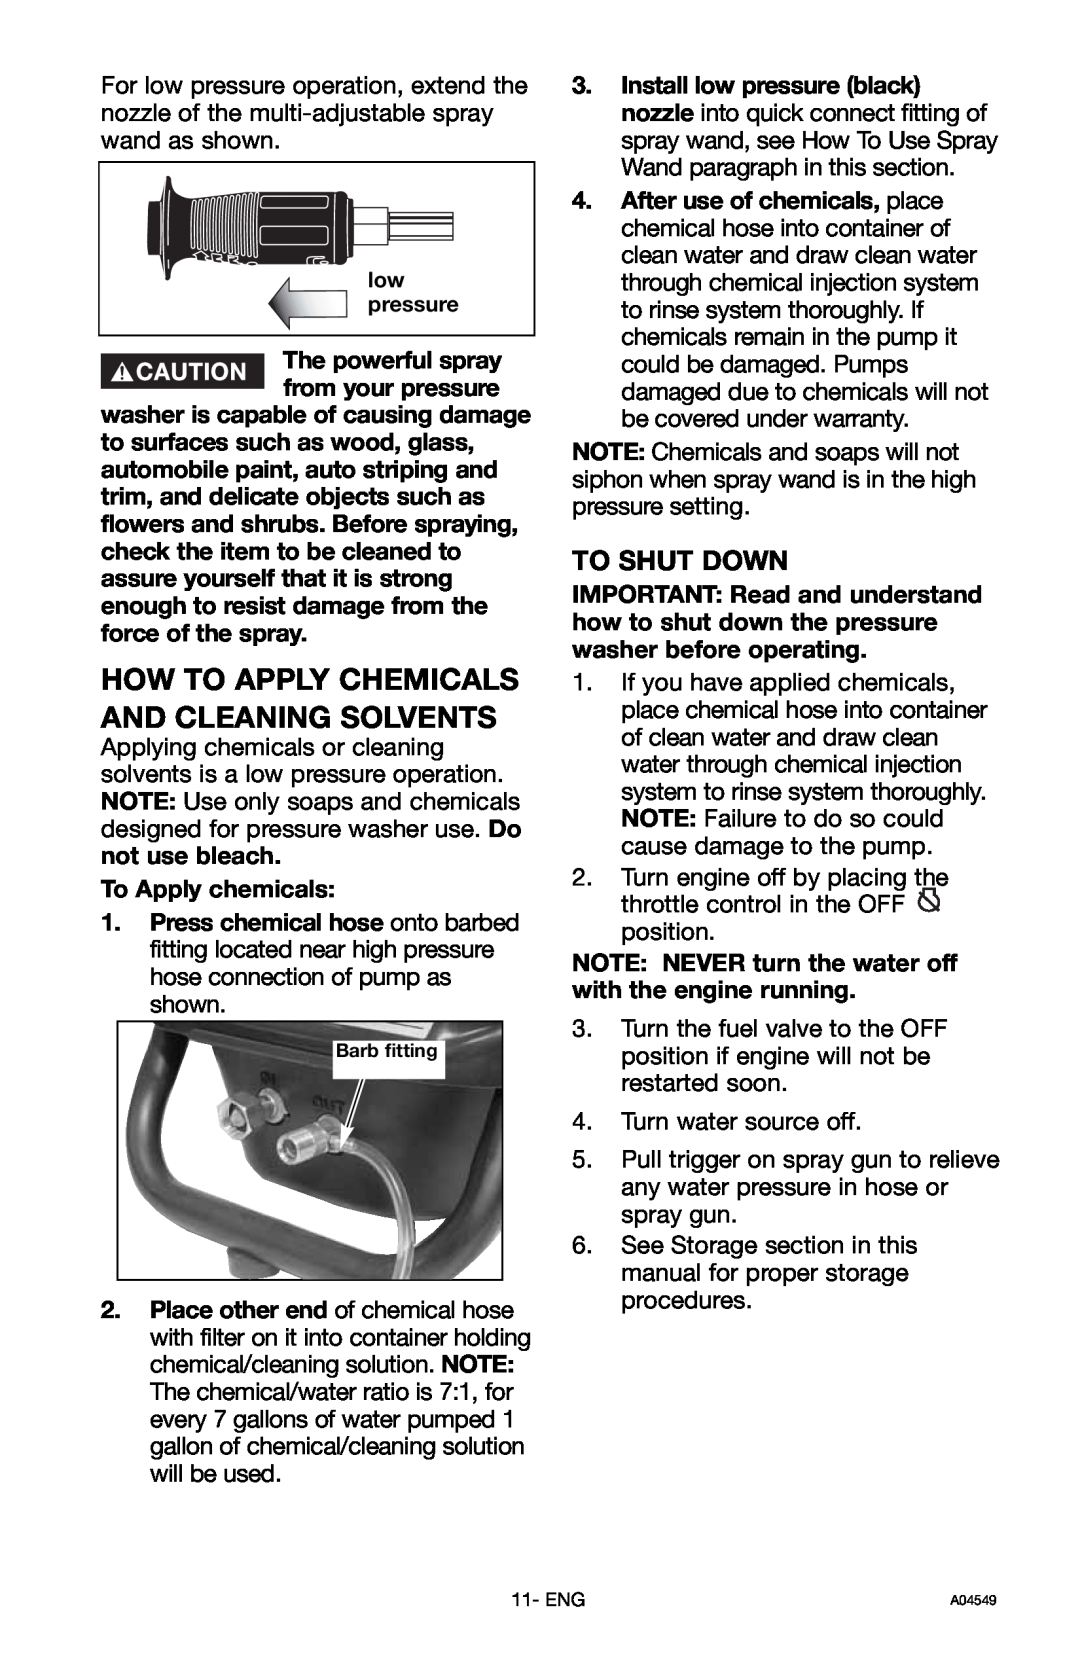 Craftsman 919.769063 owner manual How To Apply Chemicals And Cleaning Solvents, To Shut Down 